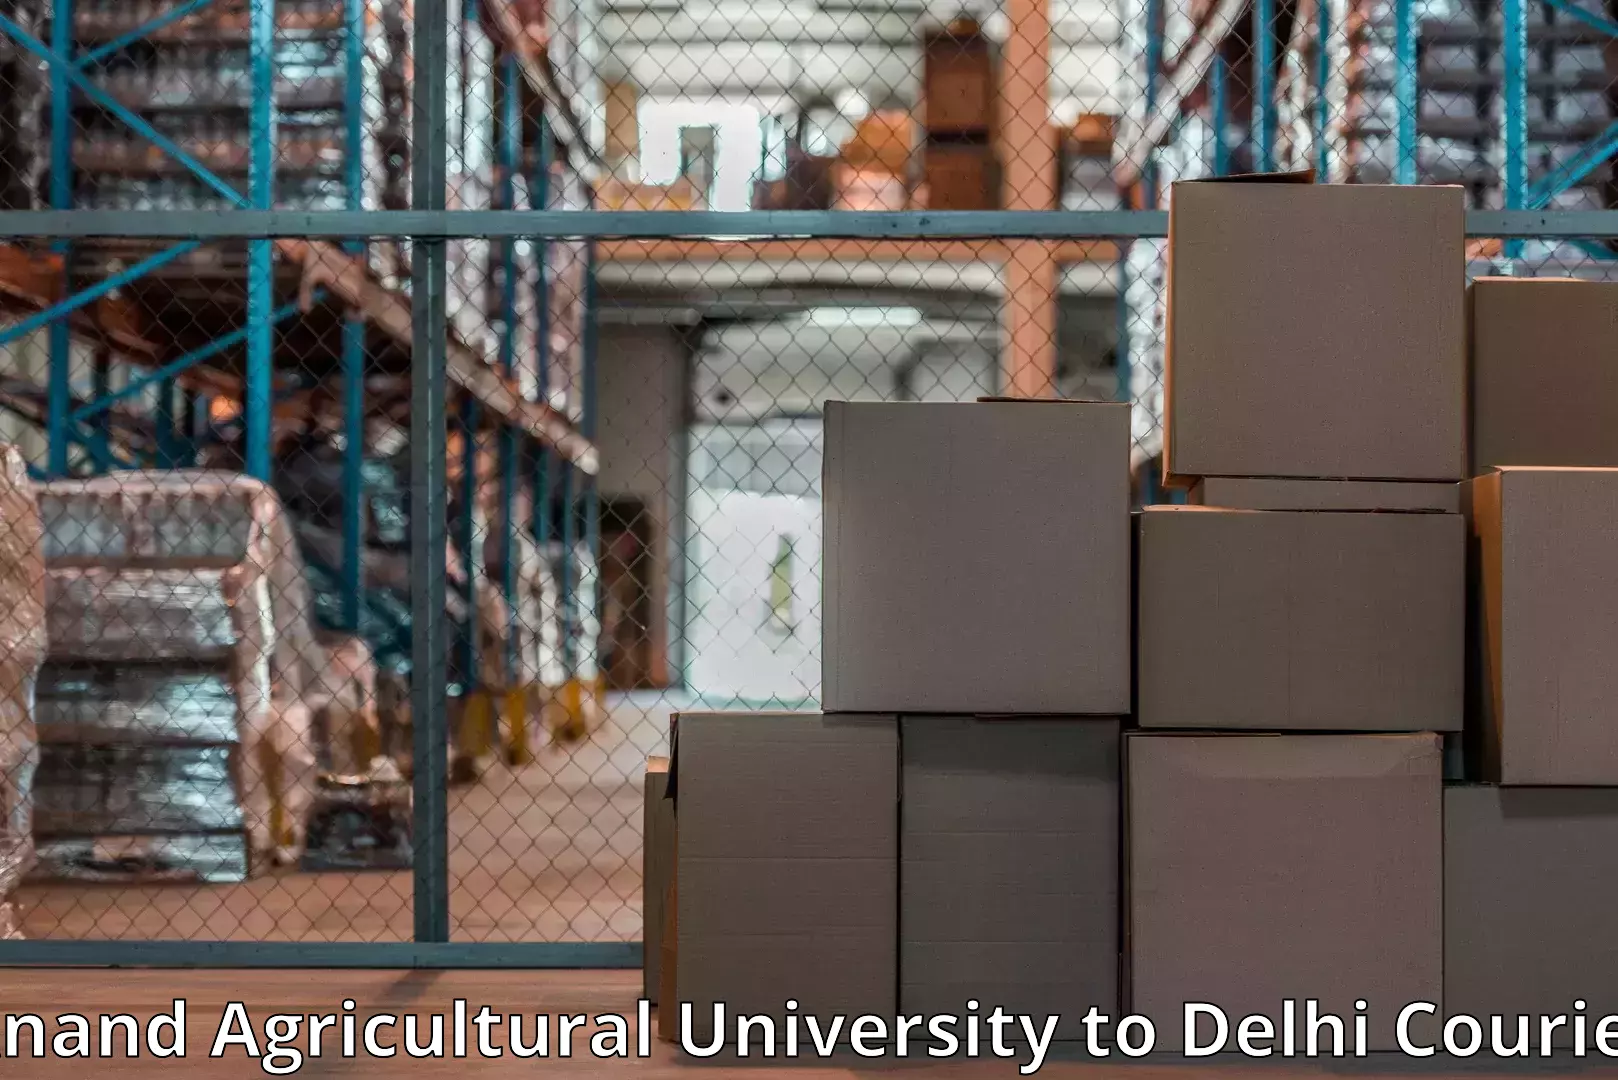 Efficient home relocation Anand Agricultural University to NCR